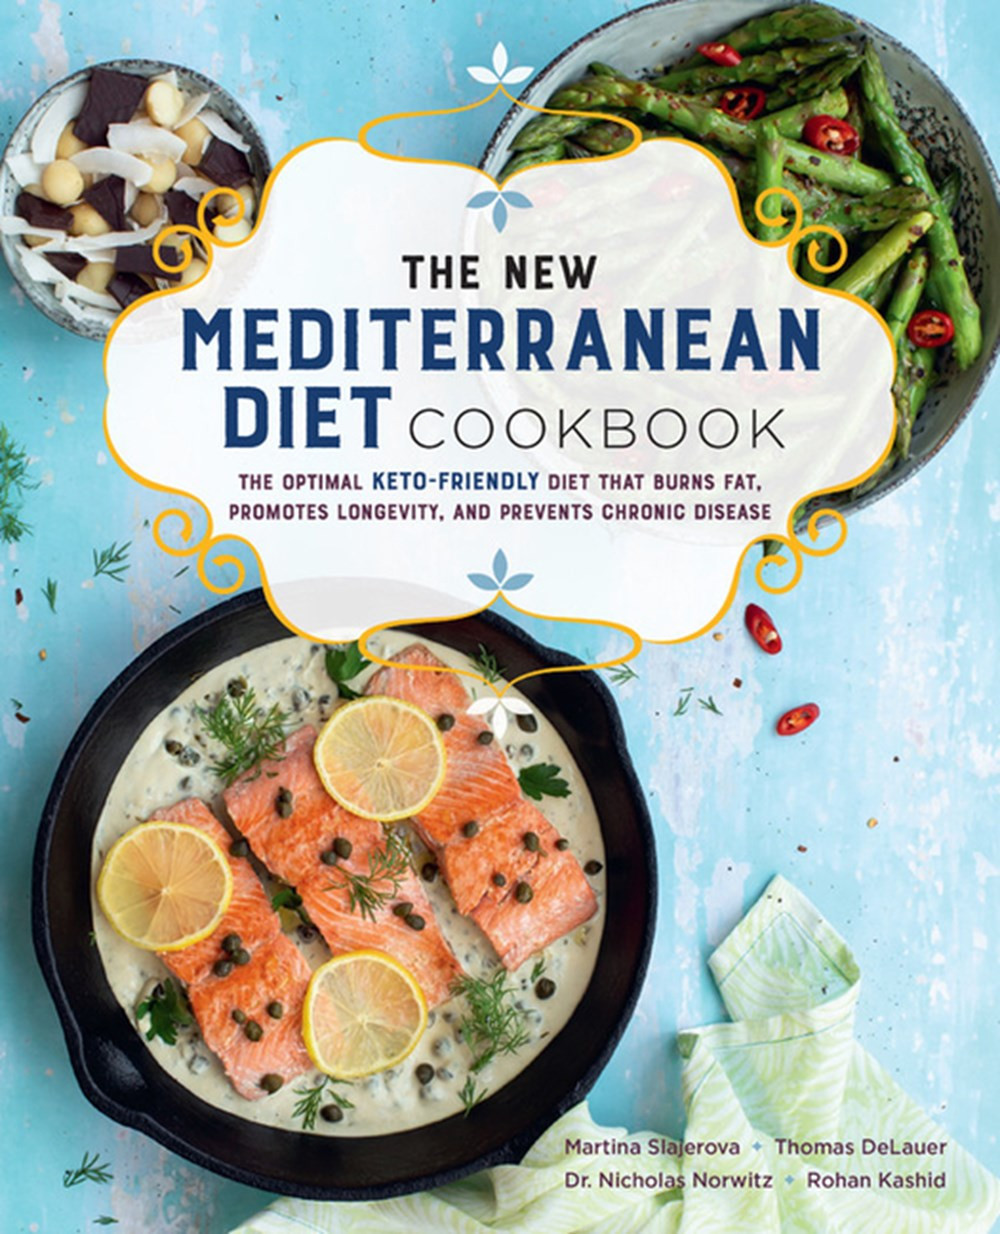 The top 15 Ideas About the New Mediterranean Diet Cookbook